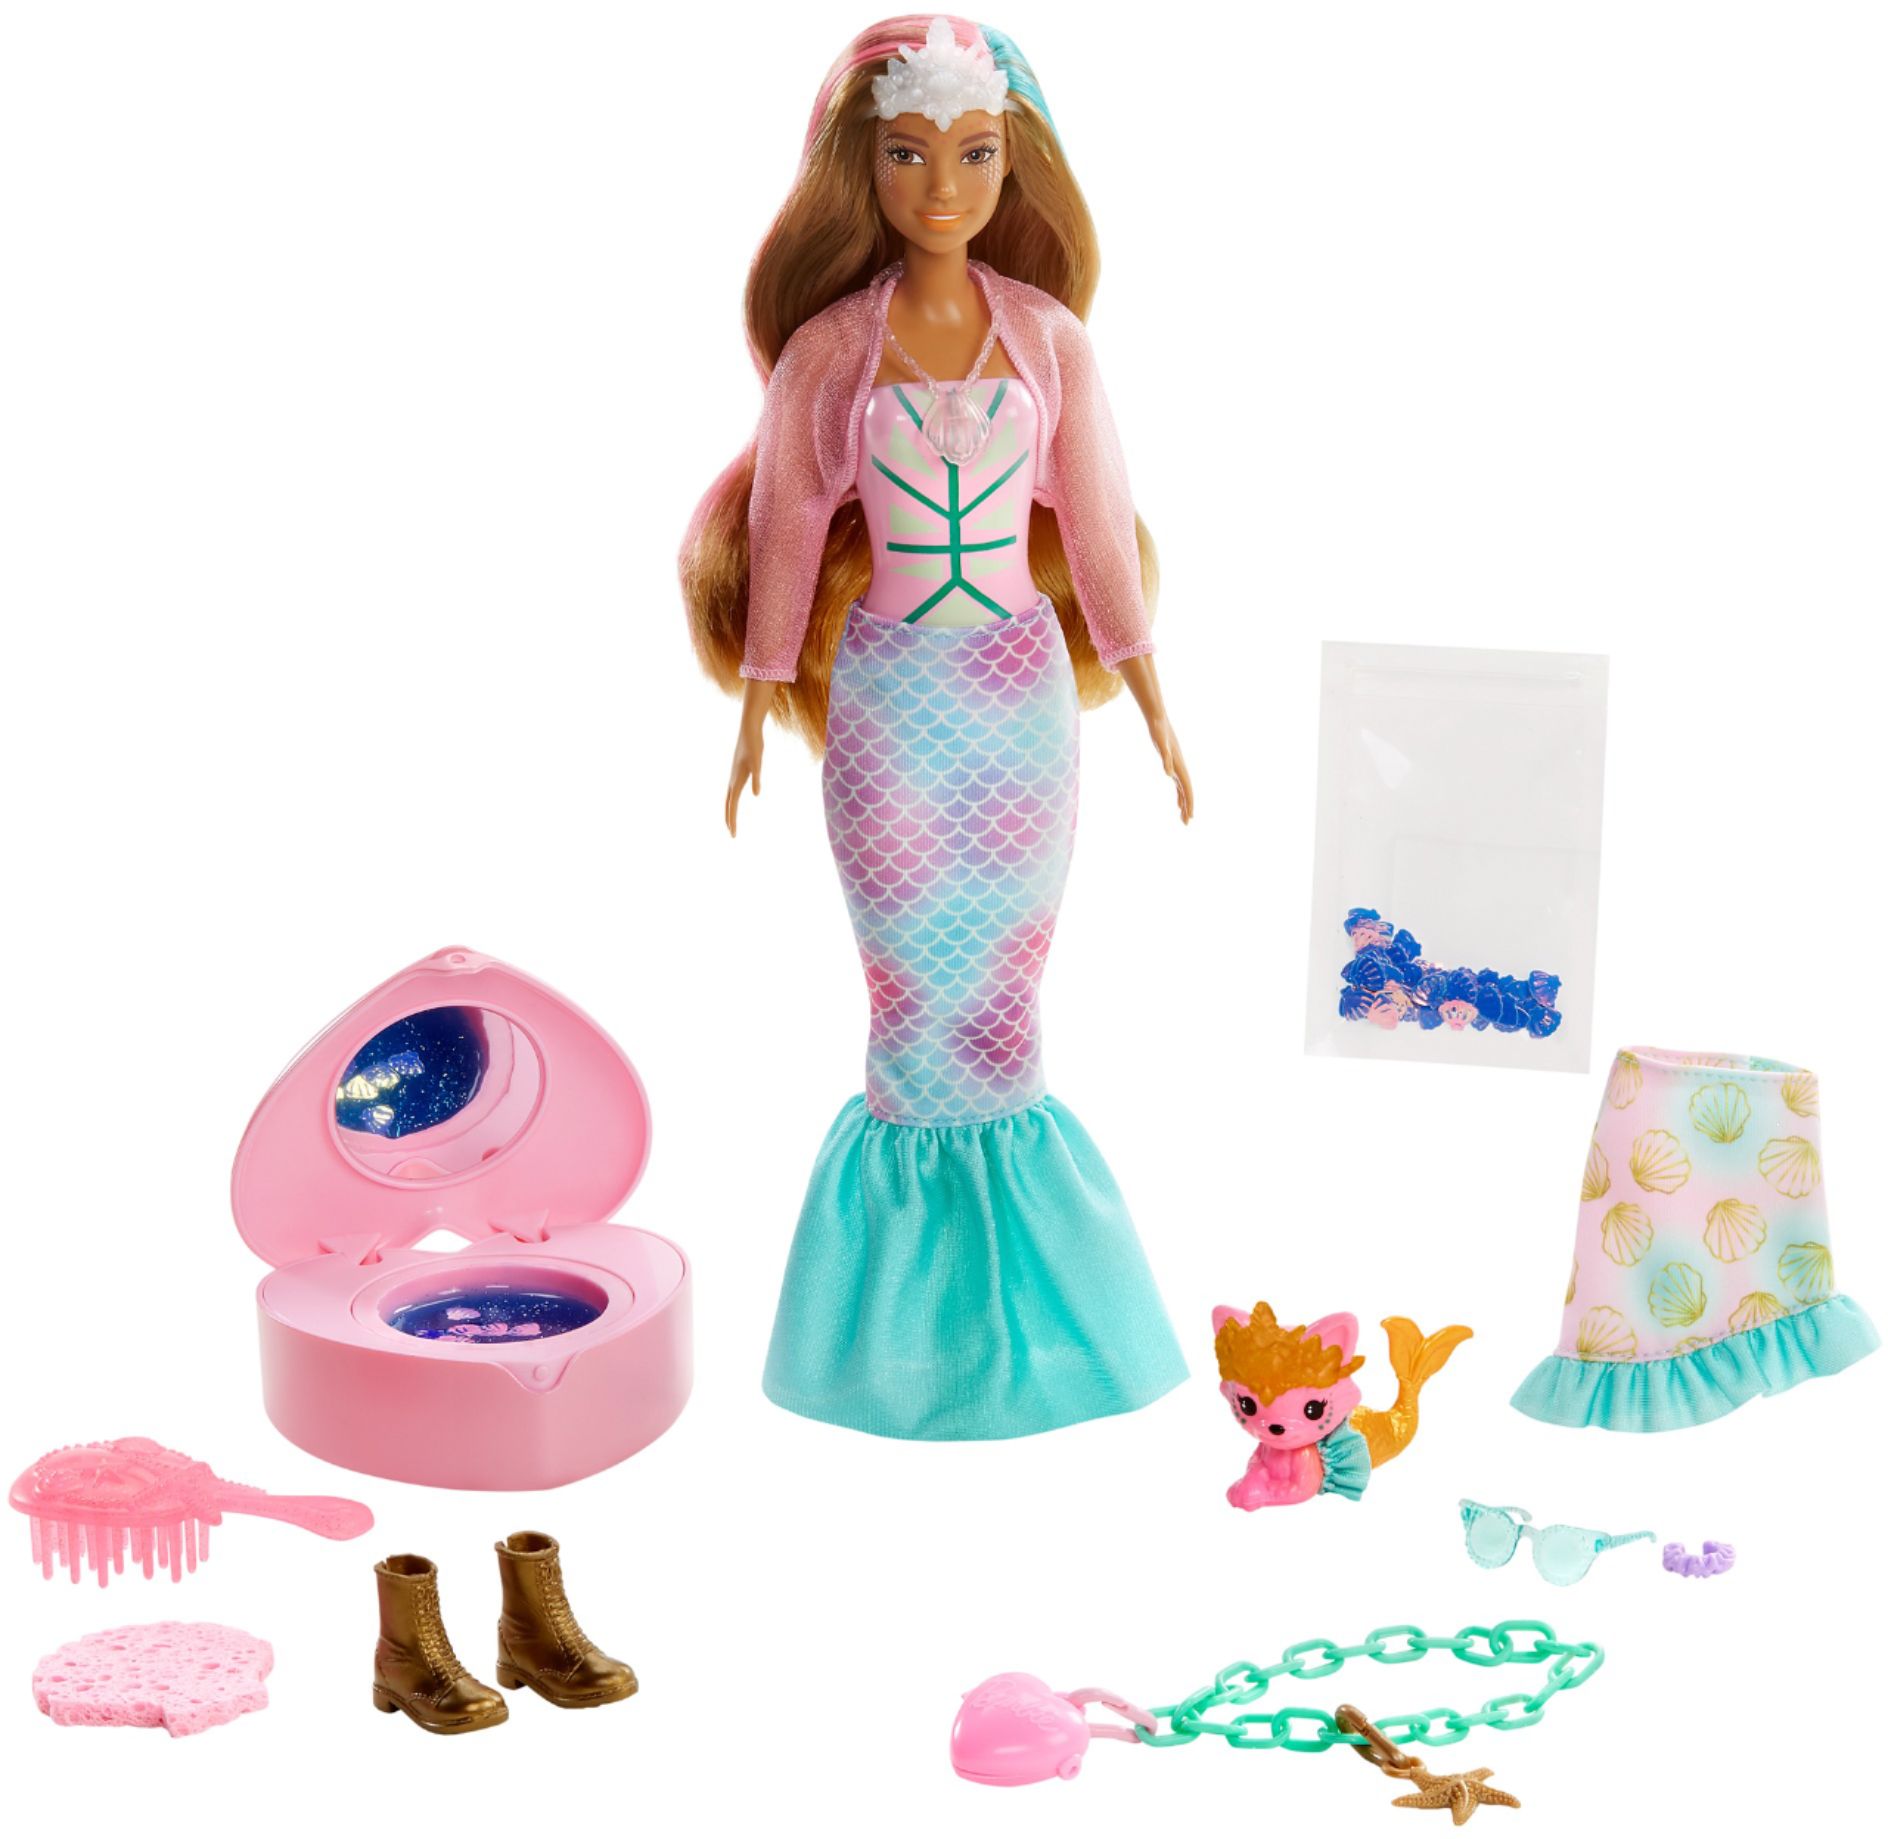 Barbie Doll Colour Reveal Peel Mermaid 25 Accessories Toy Gift For KIds GXV93 